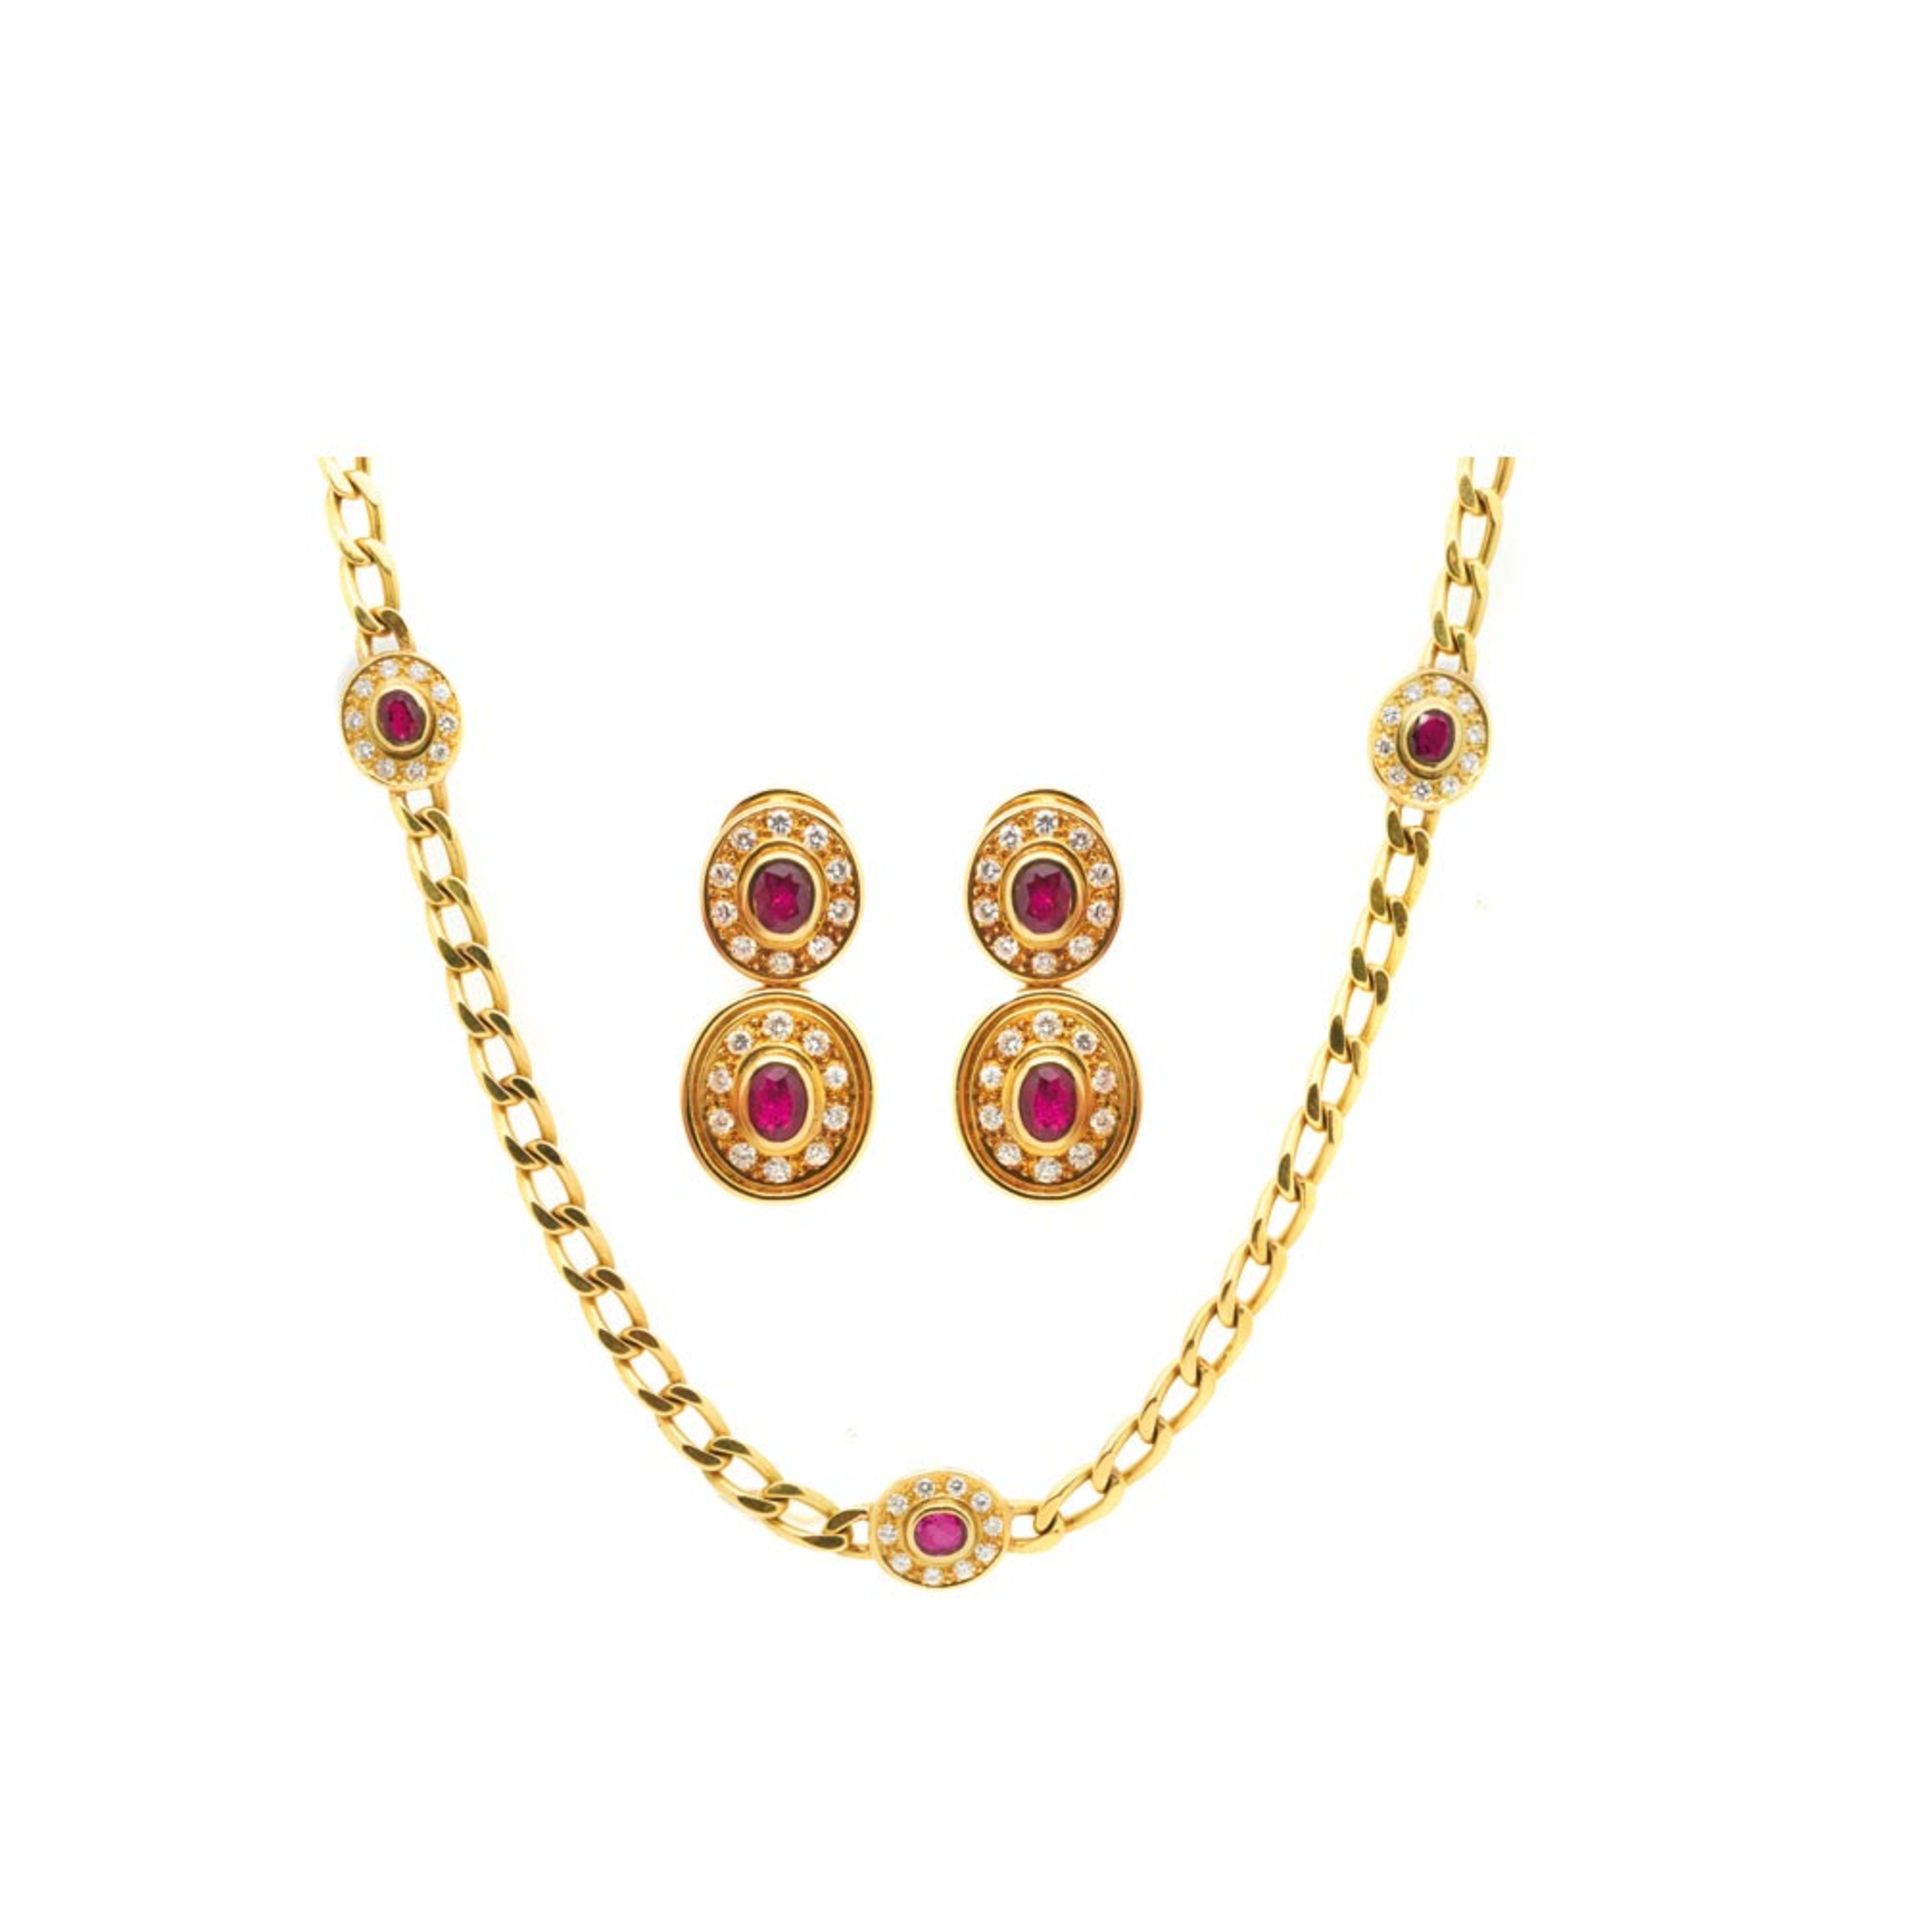 Gold, ruby and diamonds necklace and earrings set